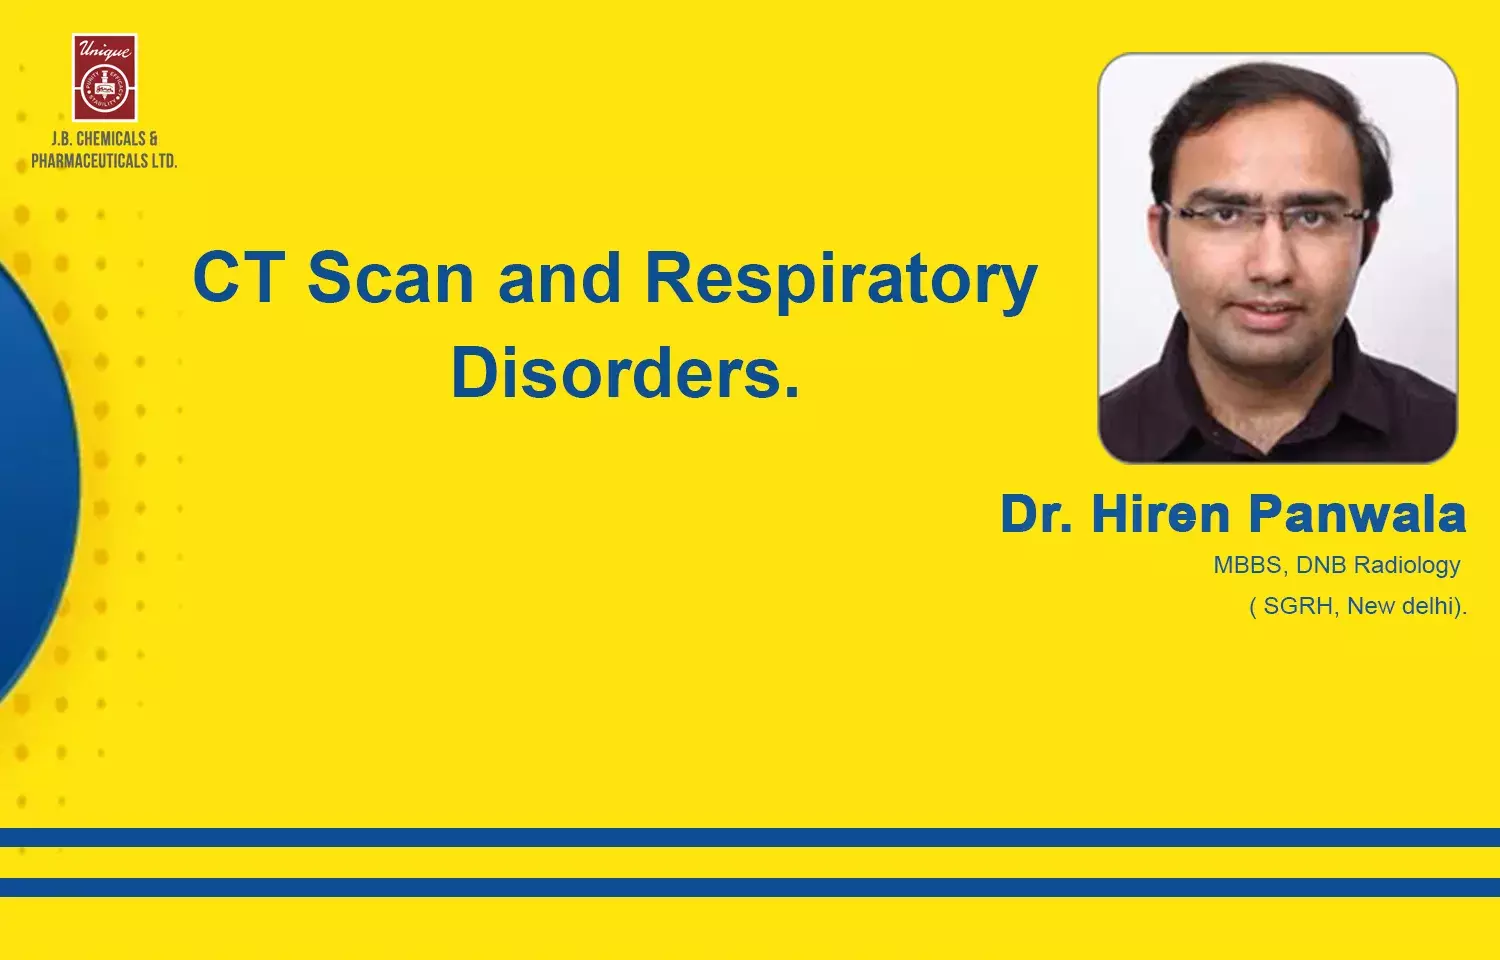 CT Scan and Respiratory Disorders